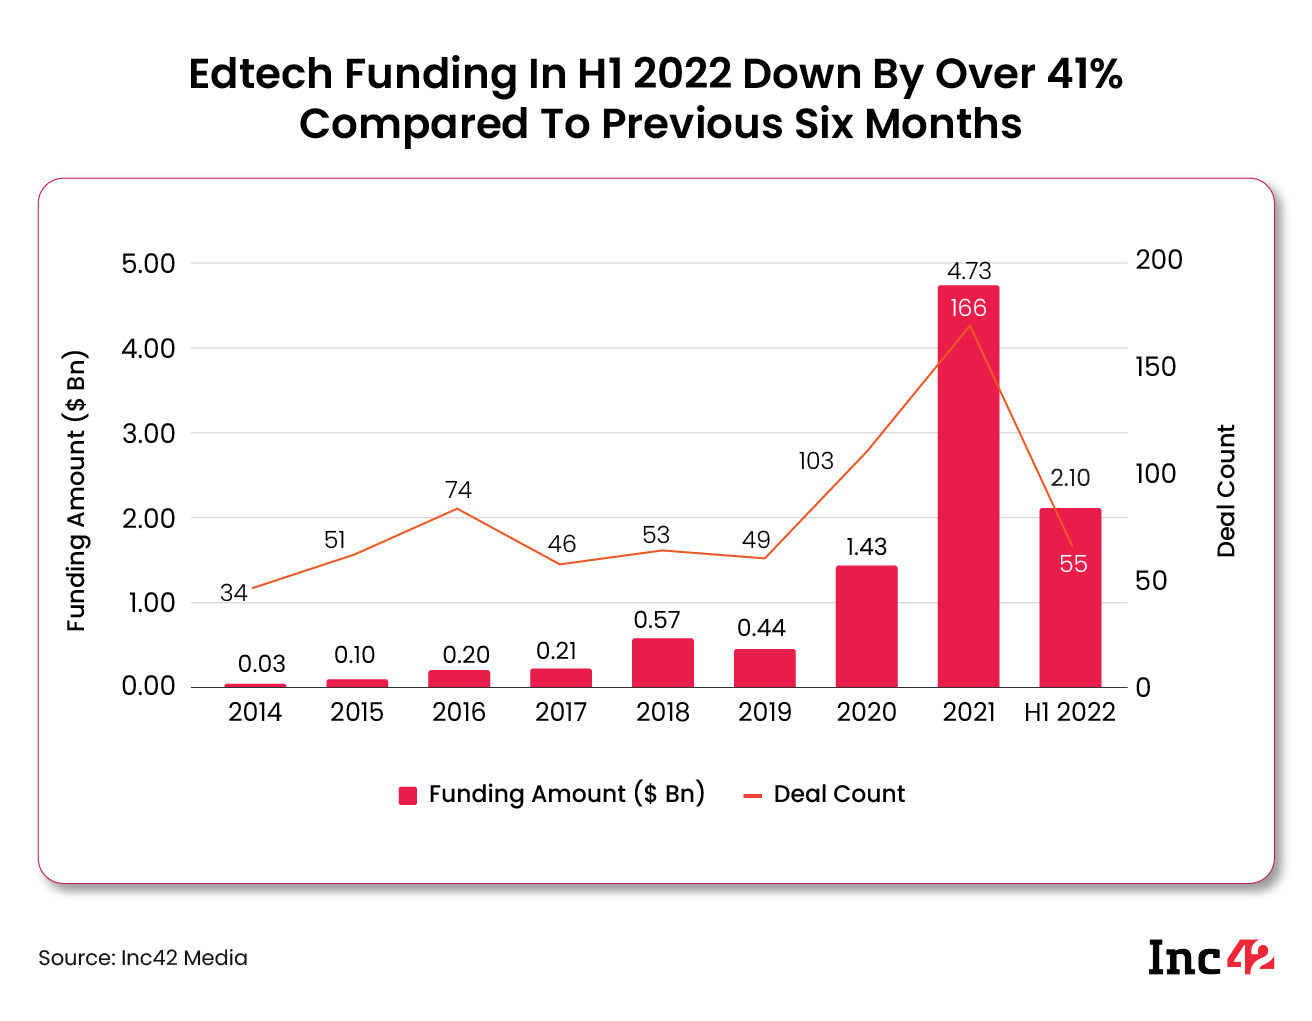 Edtech funding in H1 2022 down by over 41% compared to previous six months